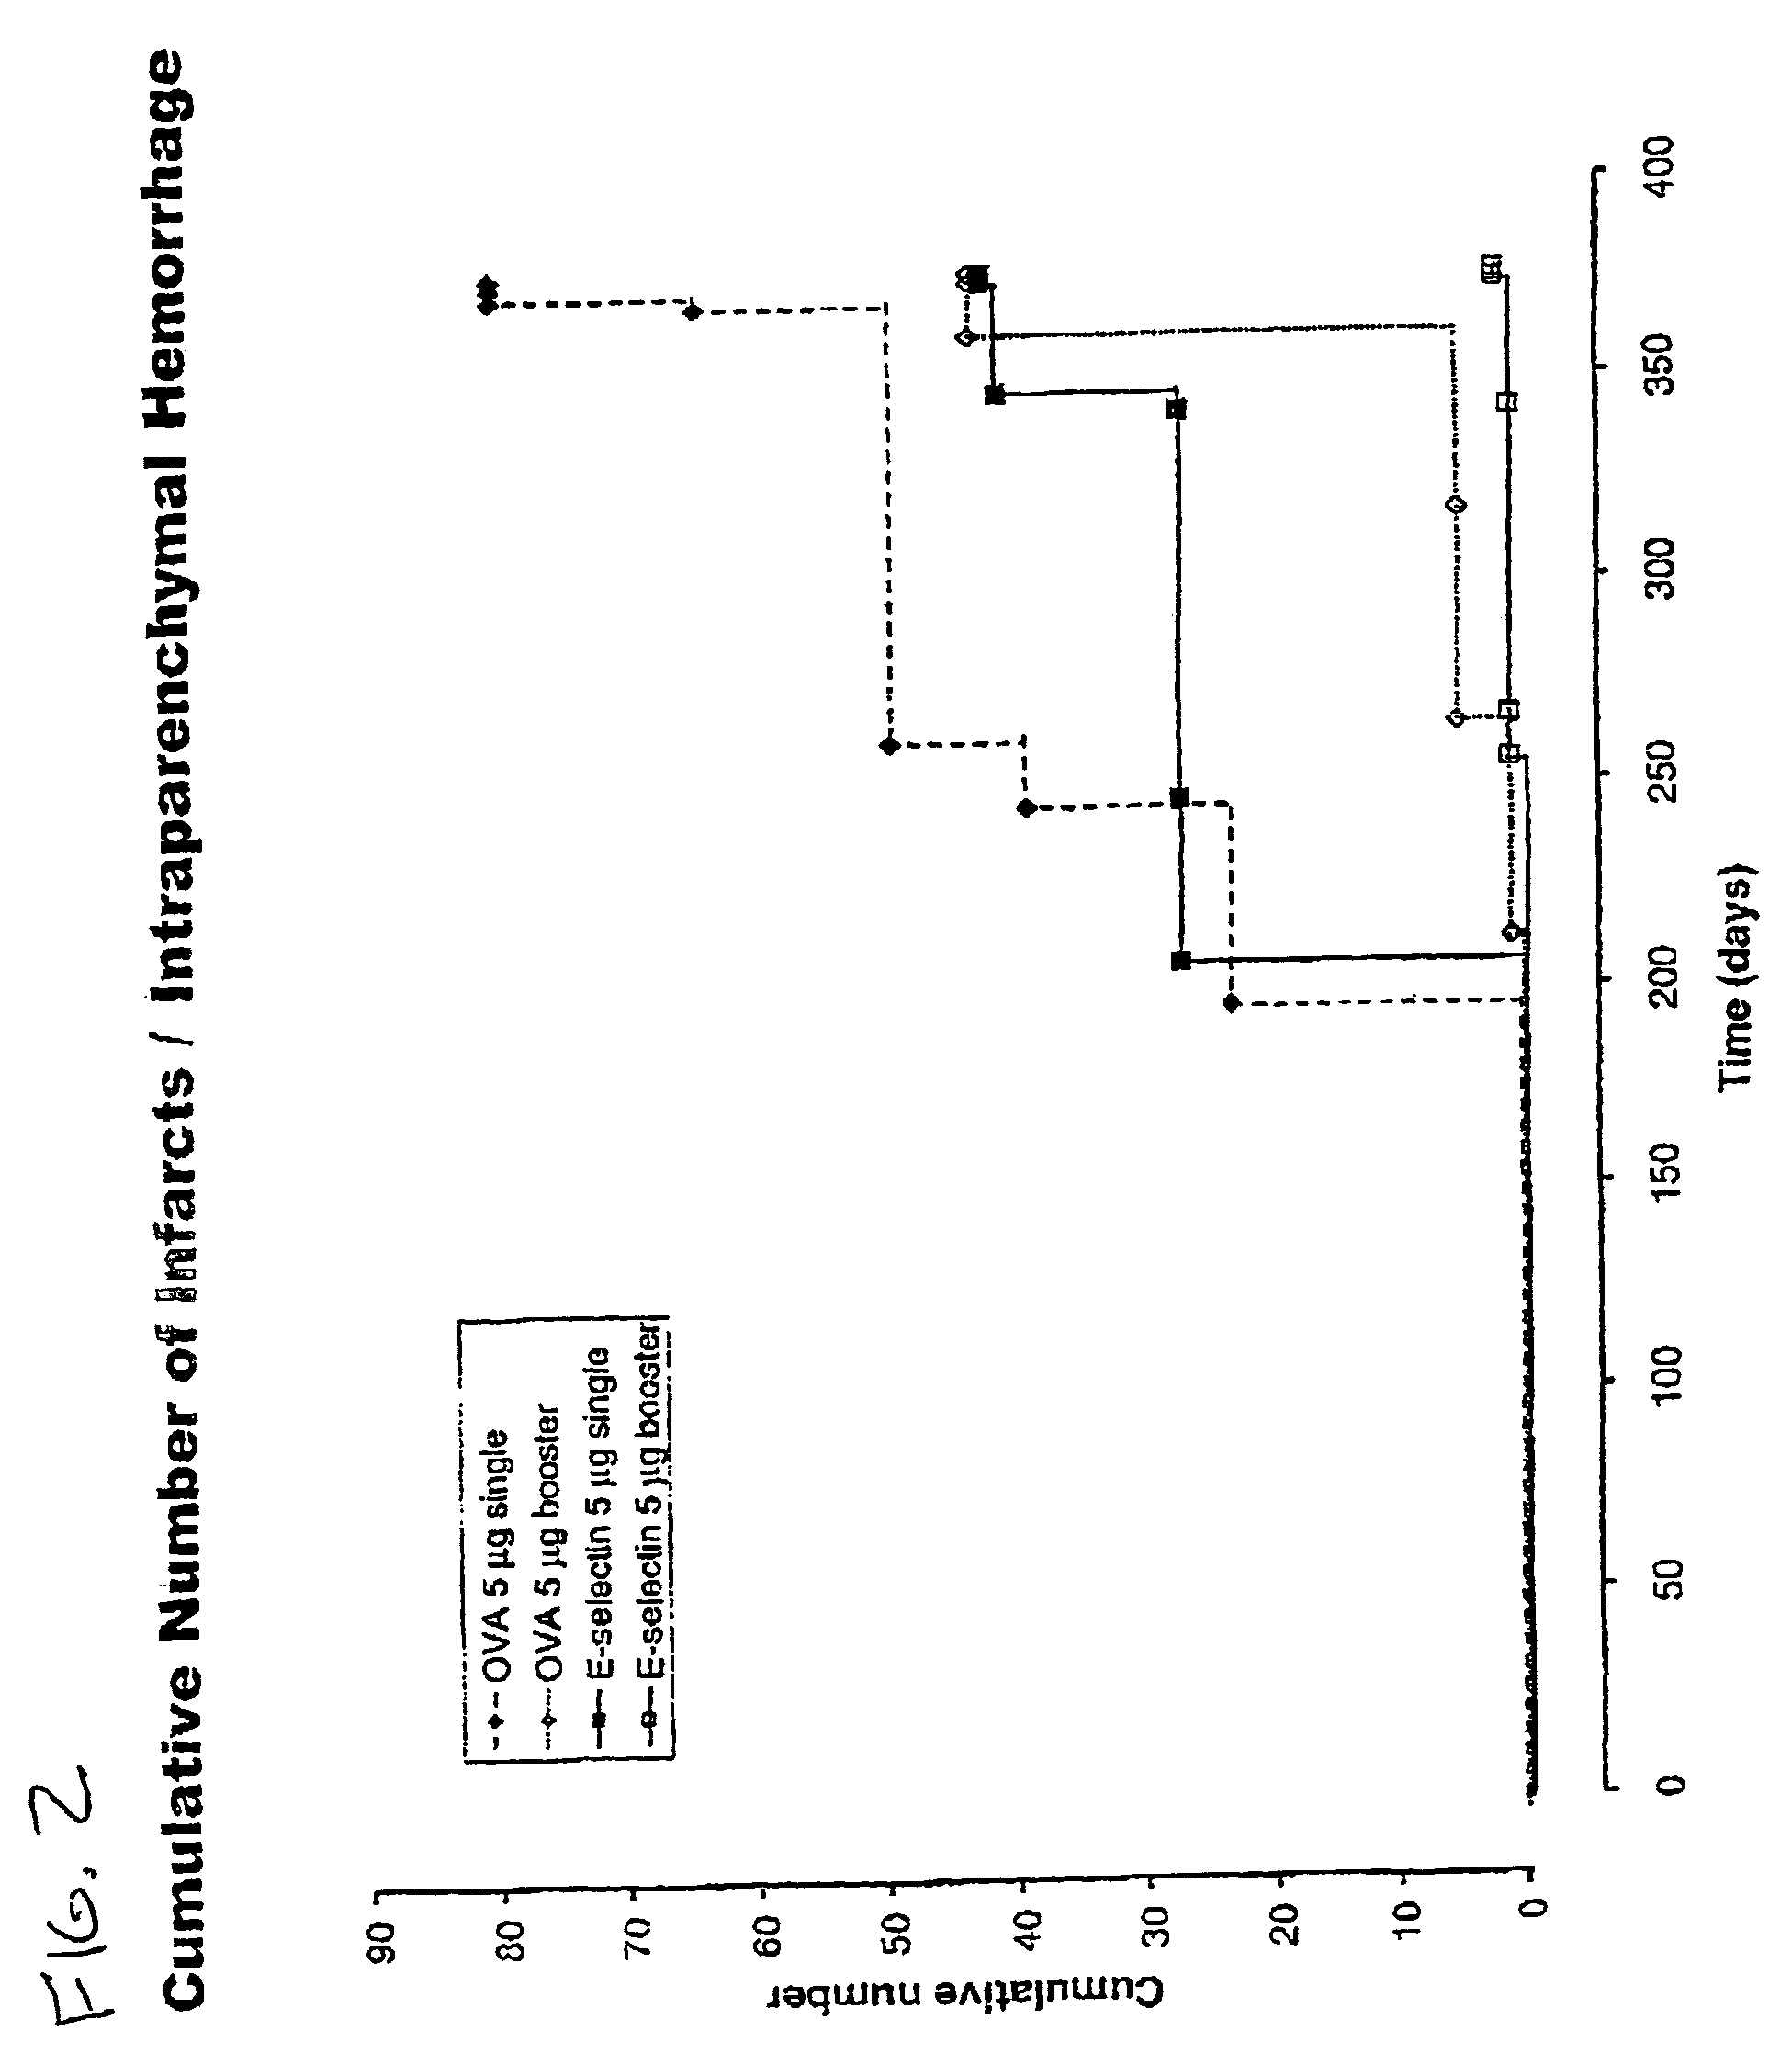 Methods for preventing strokes by inducing tolerance to e-selectin